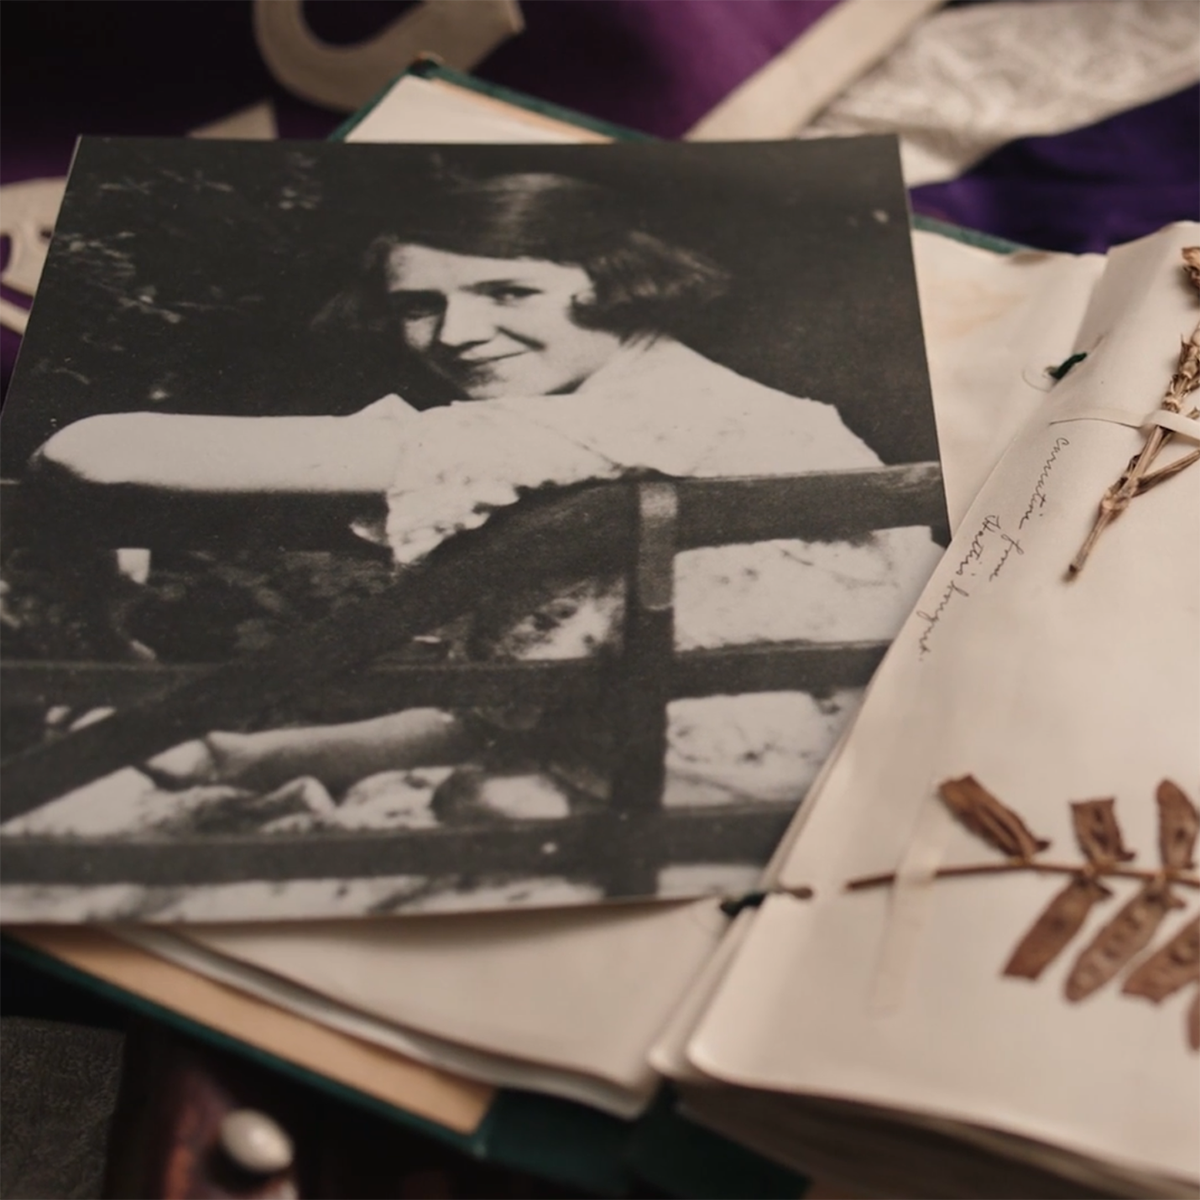 Close-up photo of a scrapbook with dried flowers and a black and white photo clipping of Rachel Carson